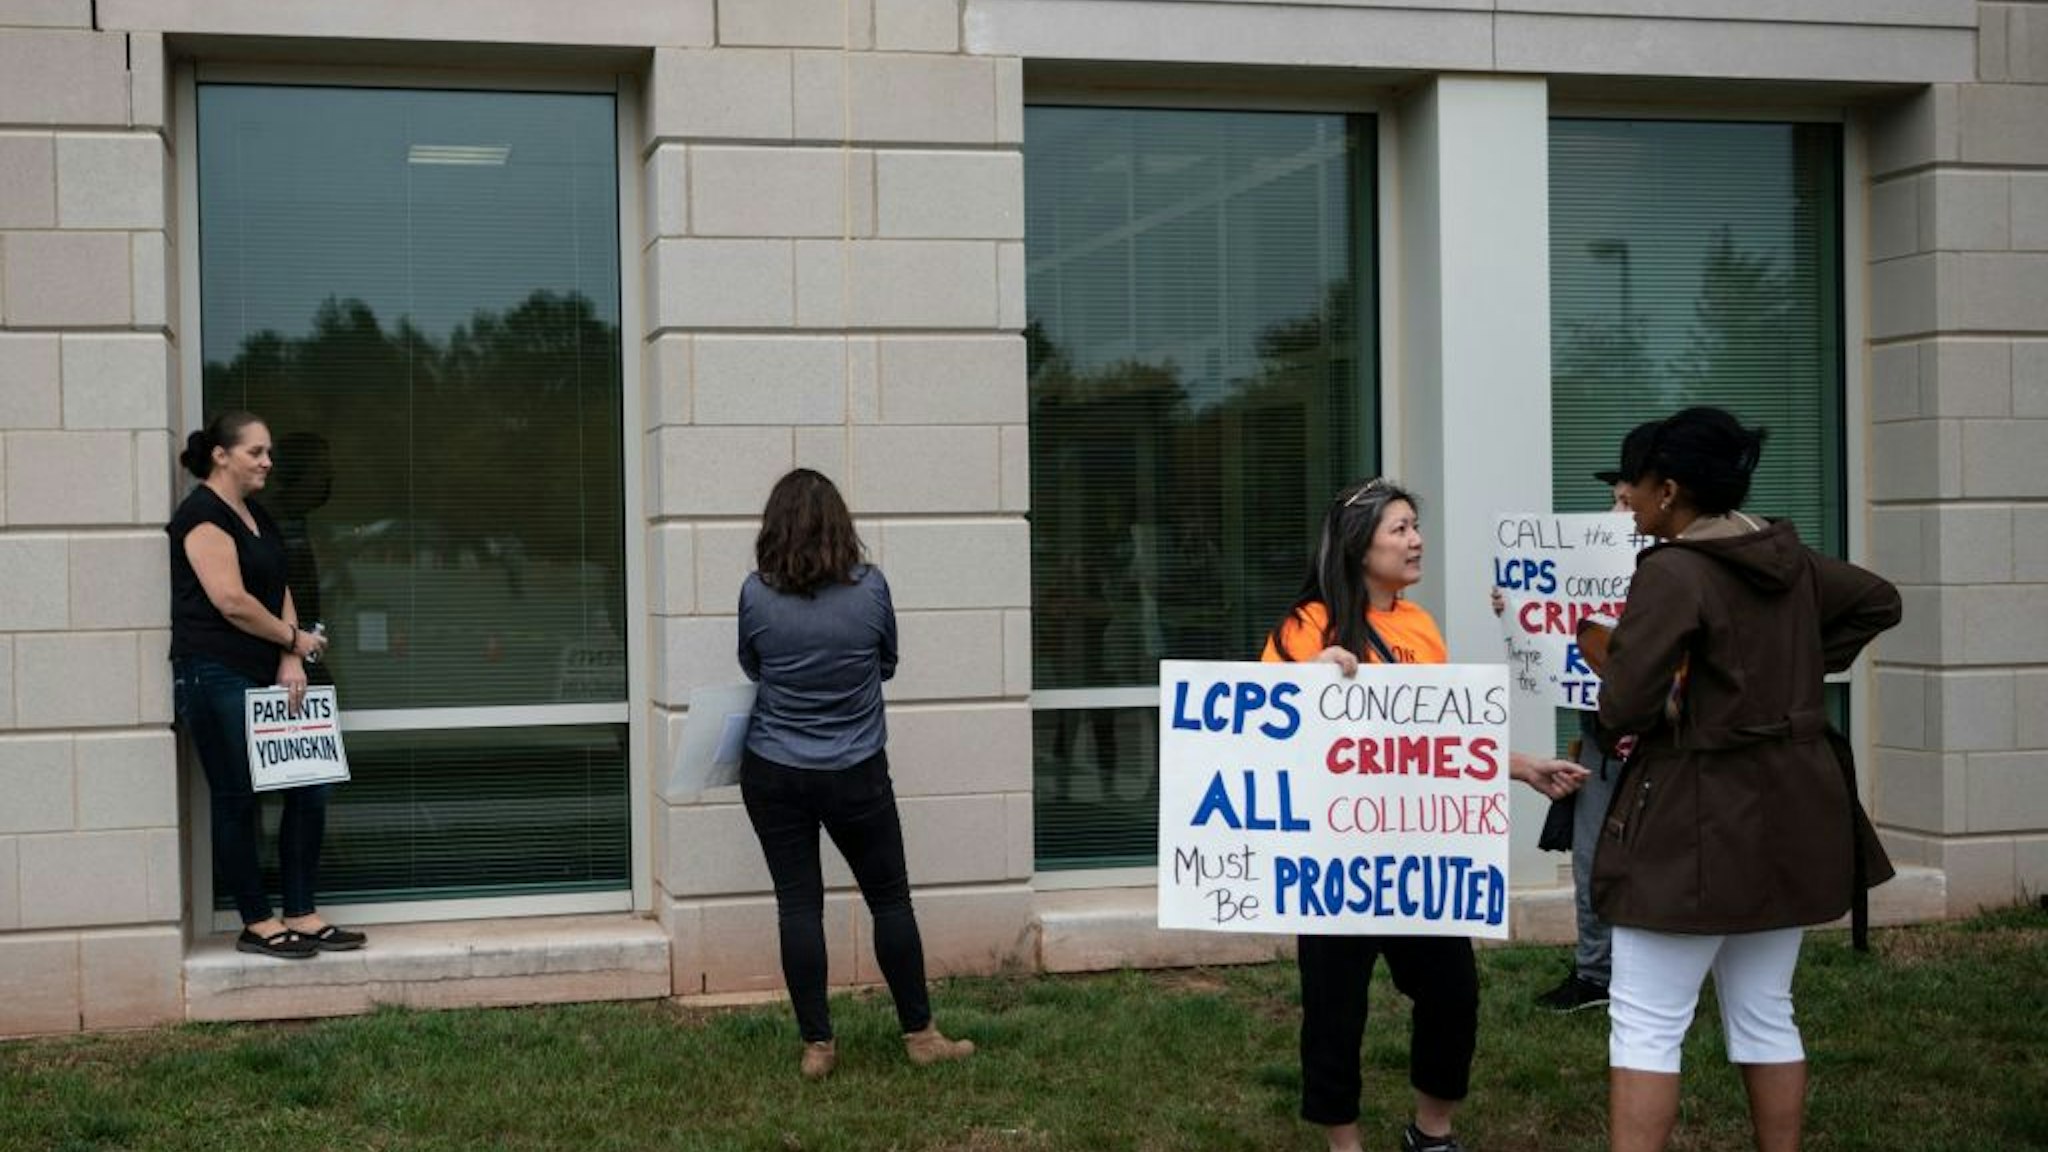 Protesters and activists hold signs as they stand outside a Loudoun County Public Schools (LCPS) board meeting in Ashburn, Virginia on October 12, 2021. - Loudoun county school board meetings have become tense recently with parents clashing with board members over transgender issues, the teaching of Critical Race Theory (CRT) and Covid-19 mandates. Recently tensions between groups of parents and the school board increased after parents say an allegedly transgender individual assaulted a girl at one of the schools. Earlier this month US Attorney General Merrick Garland directed federal authorities to hold strategy sessions in the next month with law enforcement to address the increasing threats targeting school board members, teachers and other employees in the nation's public schools. This in response to a request from the National School Boards Association asking US President Joe Biden for federal assistance to investigate and stop threats made over policies including mask mandates, likening the vitriol to a form of domestic terrorism. (Photo by Andrew CABALLERO-REYNOLDS / AFP)